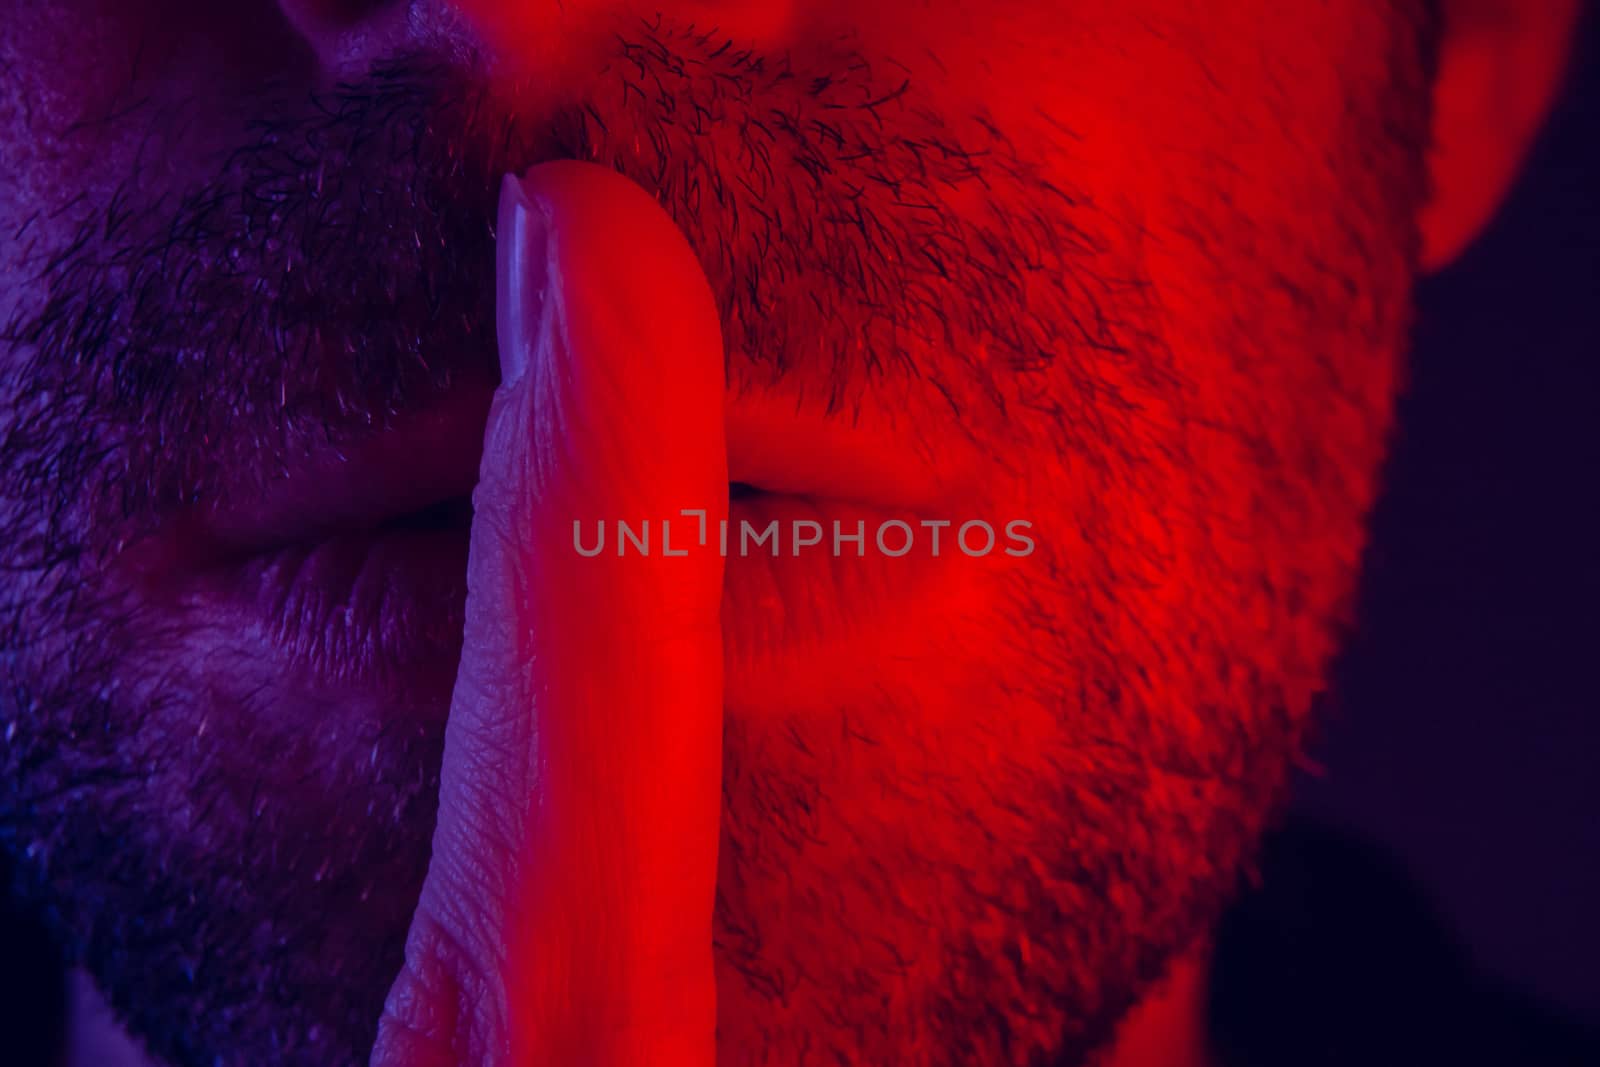 Macro close up on man with seductive facial expression holding f by wavemovies